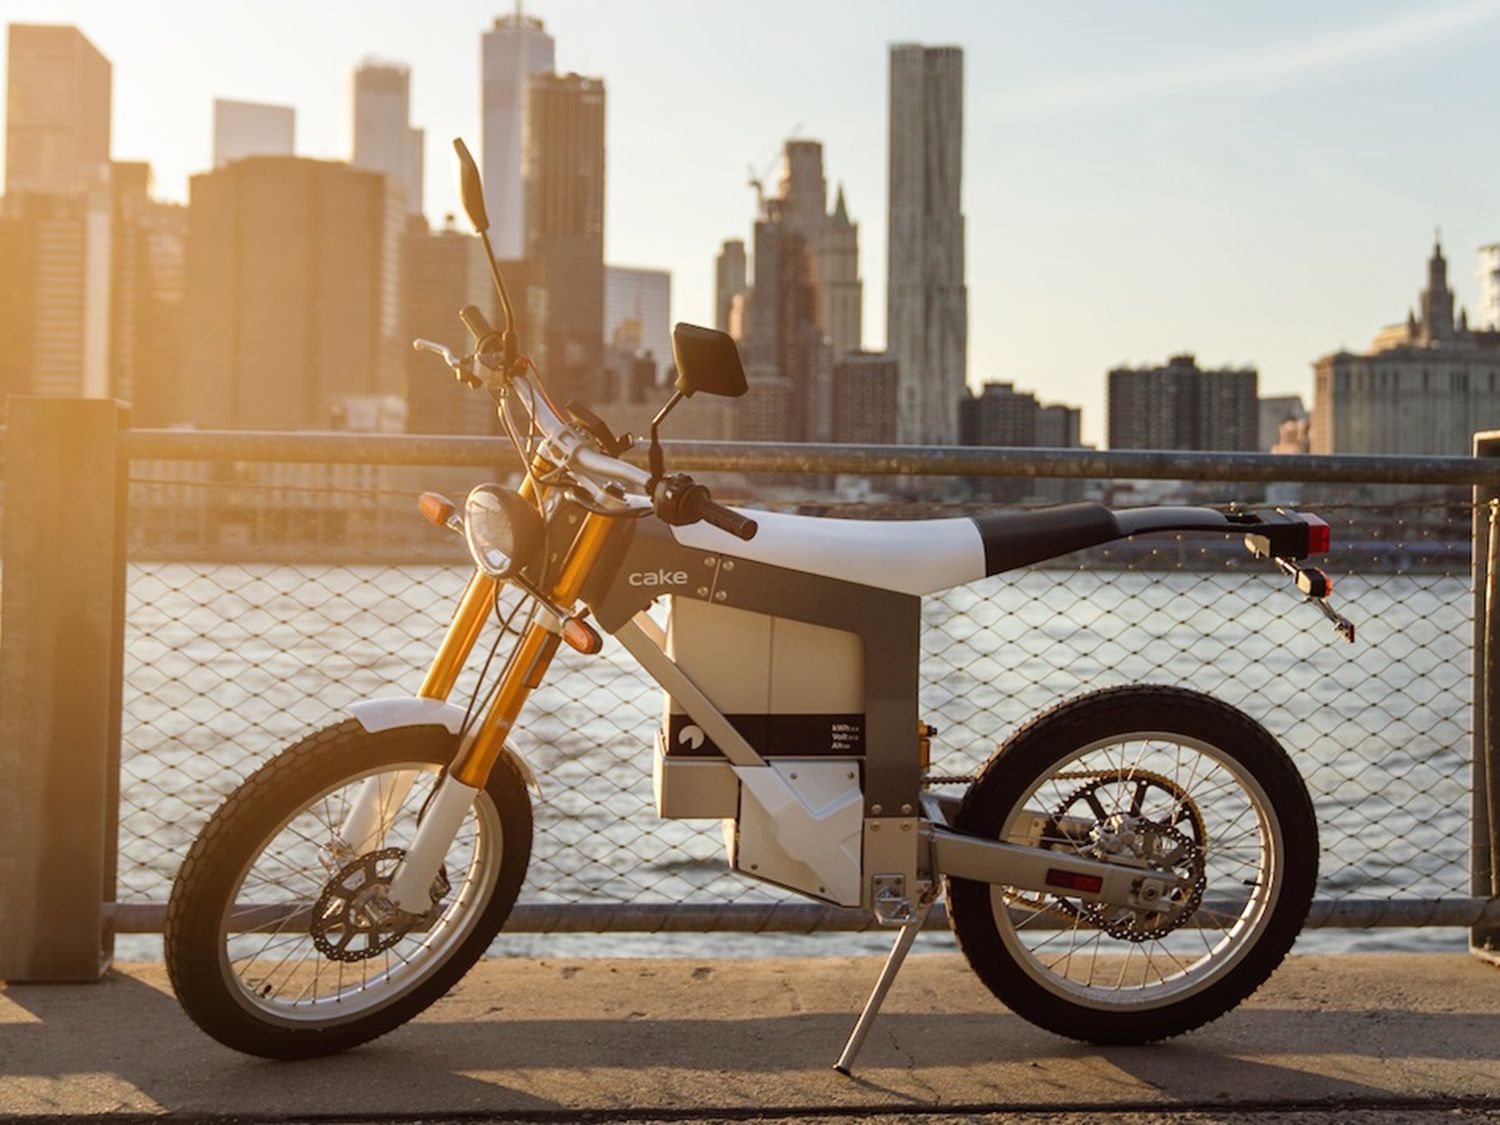 New Electric Motorcycles For Sale In 2019 Cycle World